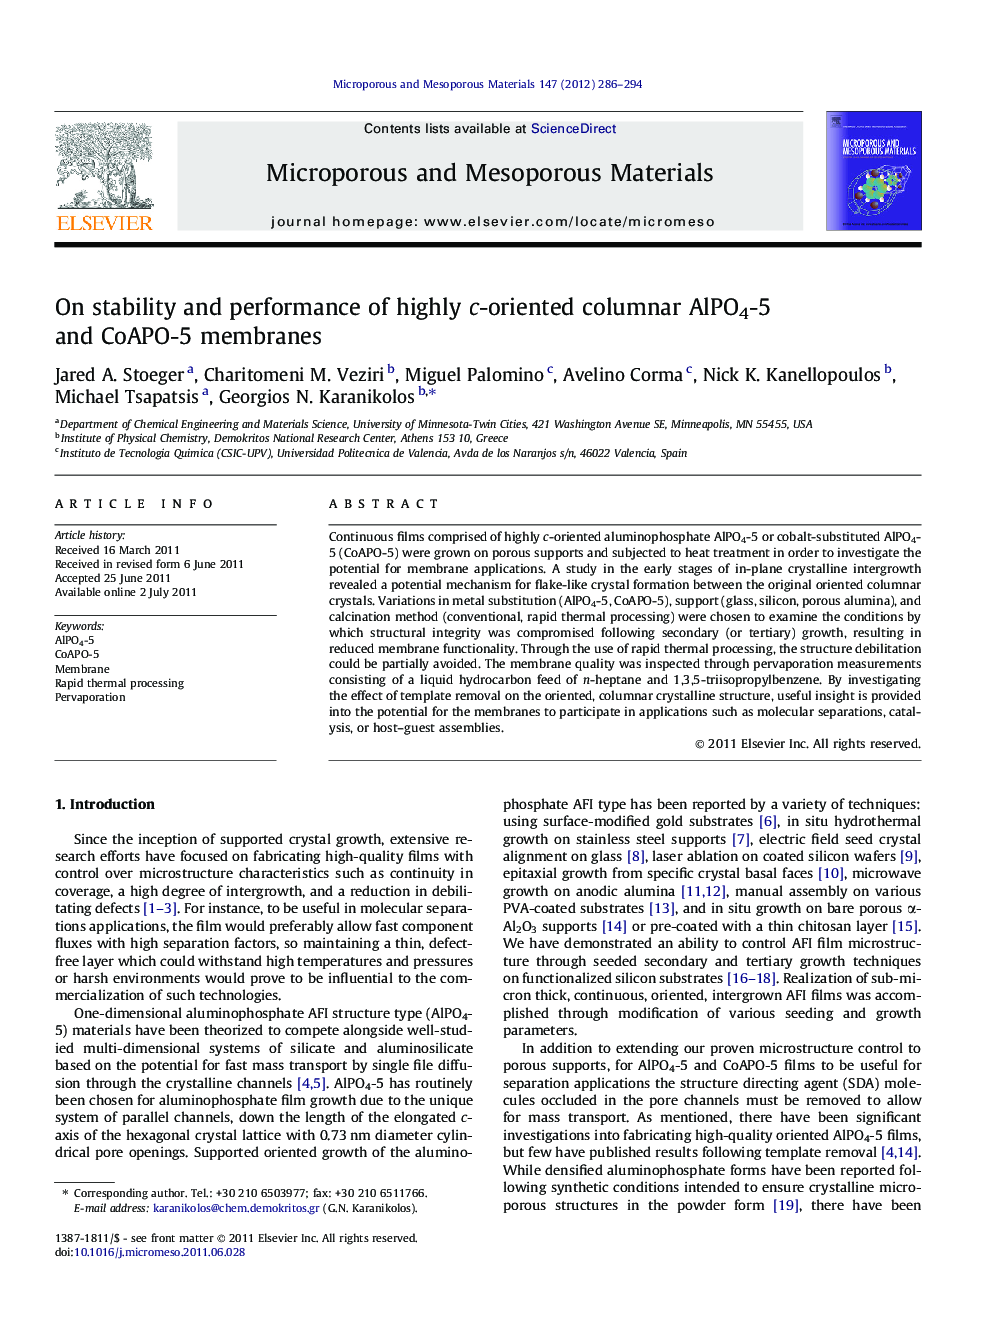 On stability and performance of highly c-oriented columnar AlPO4-5 and CoAPO-5 membranes